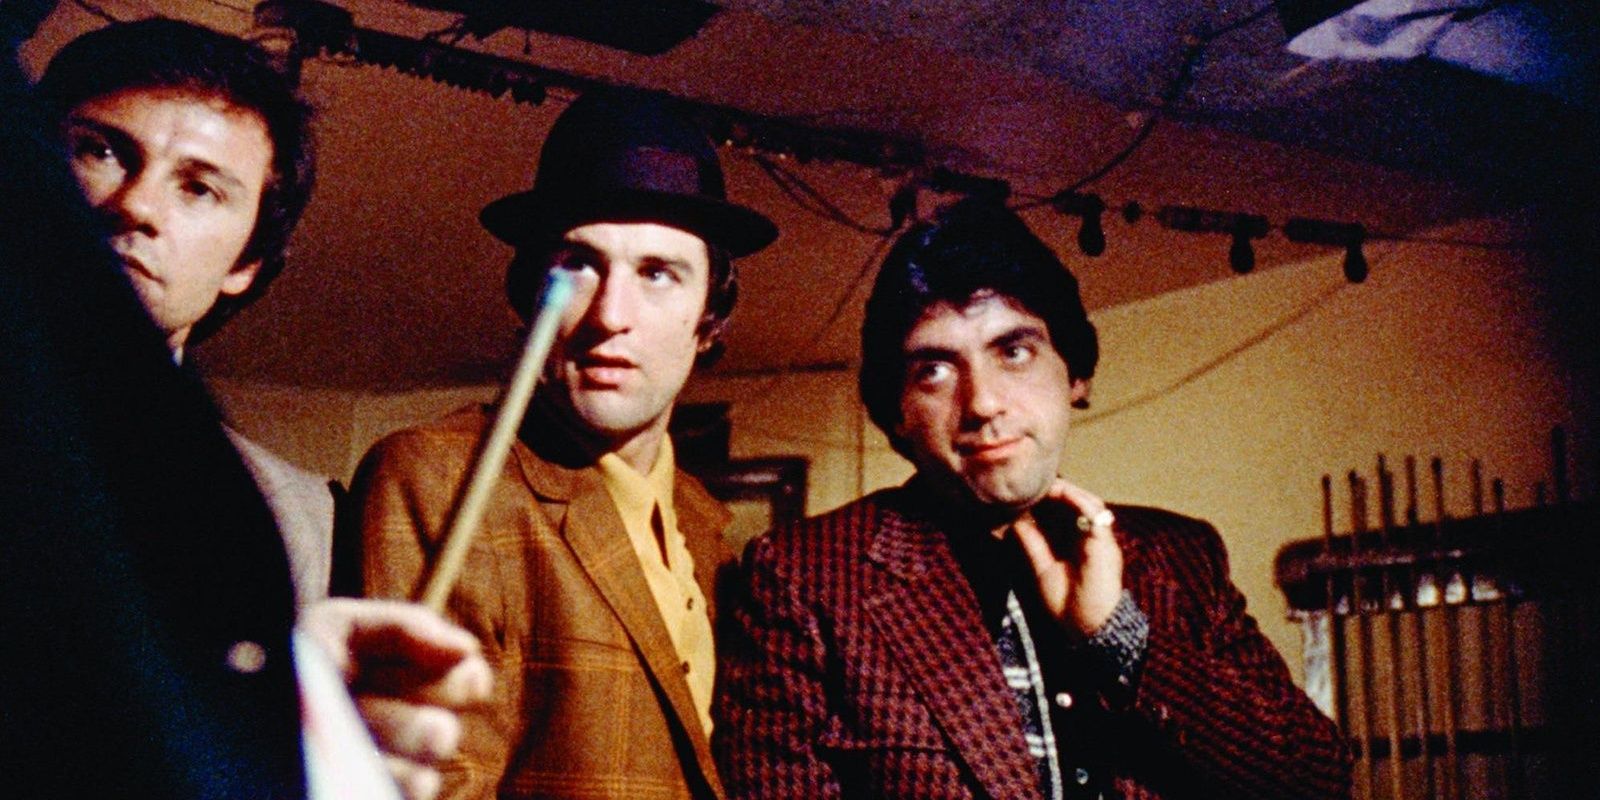 Martin Scorsese His 5 Best Gangster Films (& 5 Best That Have Nothing To Do With Organized Crime)